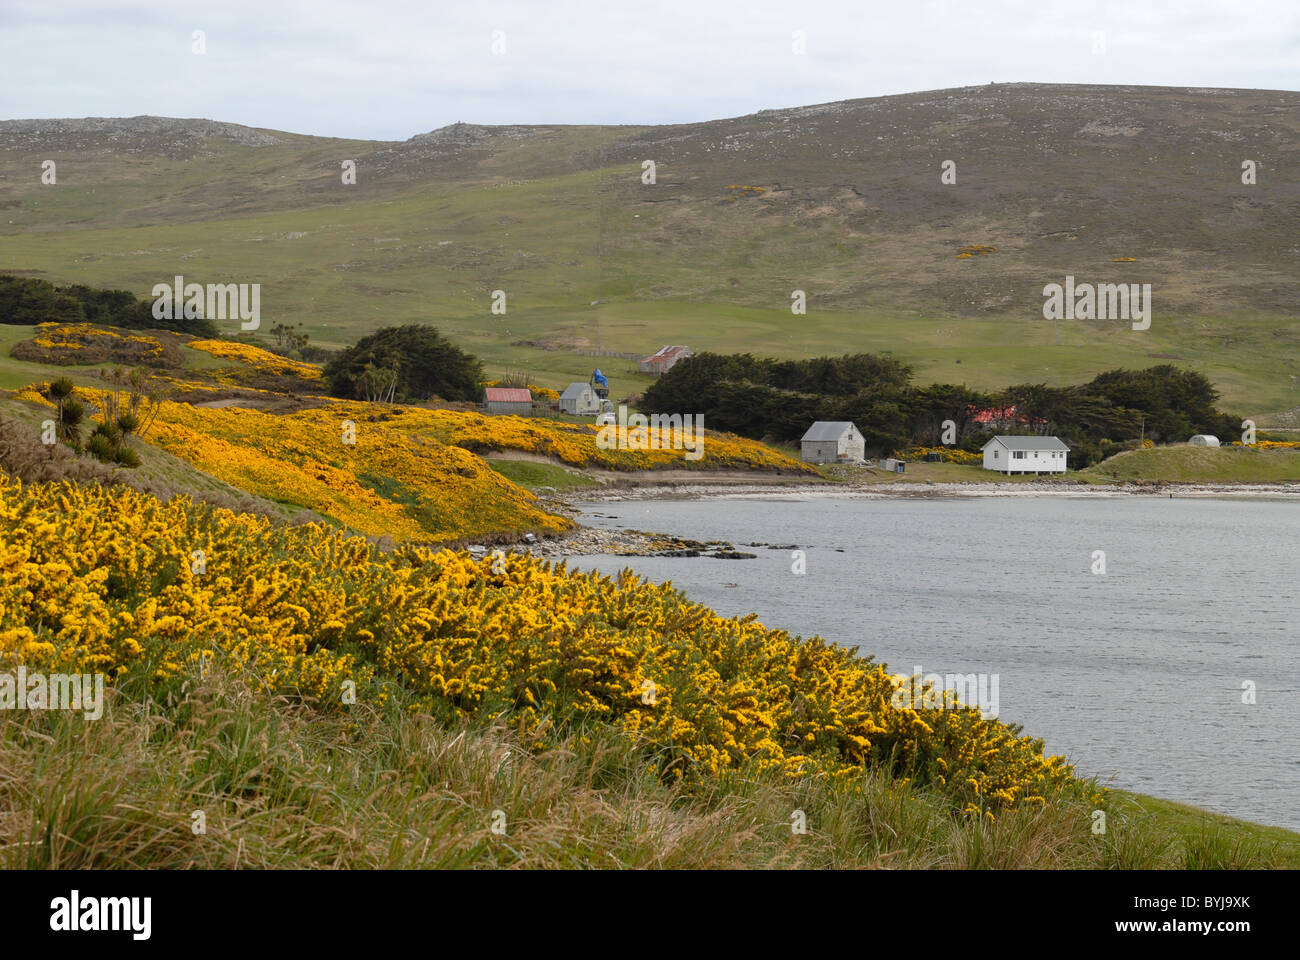 Bay and Carcass Settlement, Port Pattison, Carcass Island, with yellow flouring gorse and trees Stock Photo